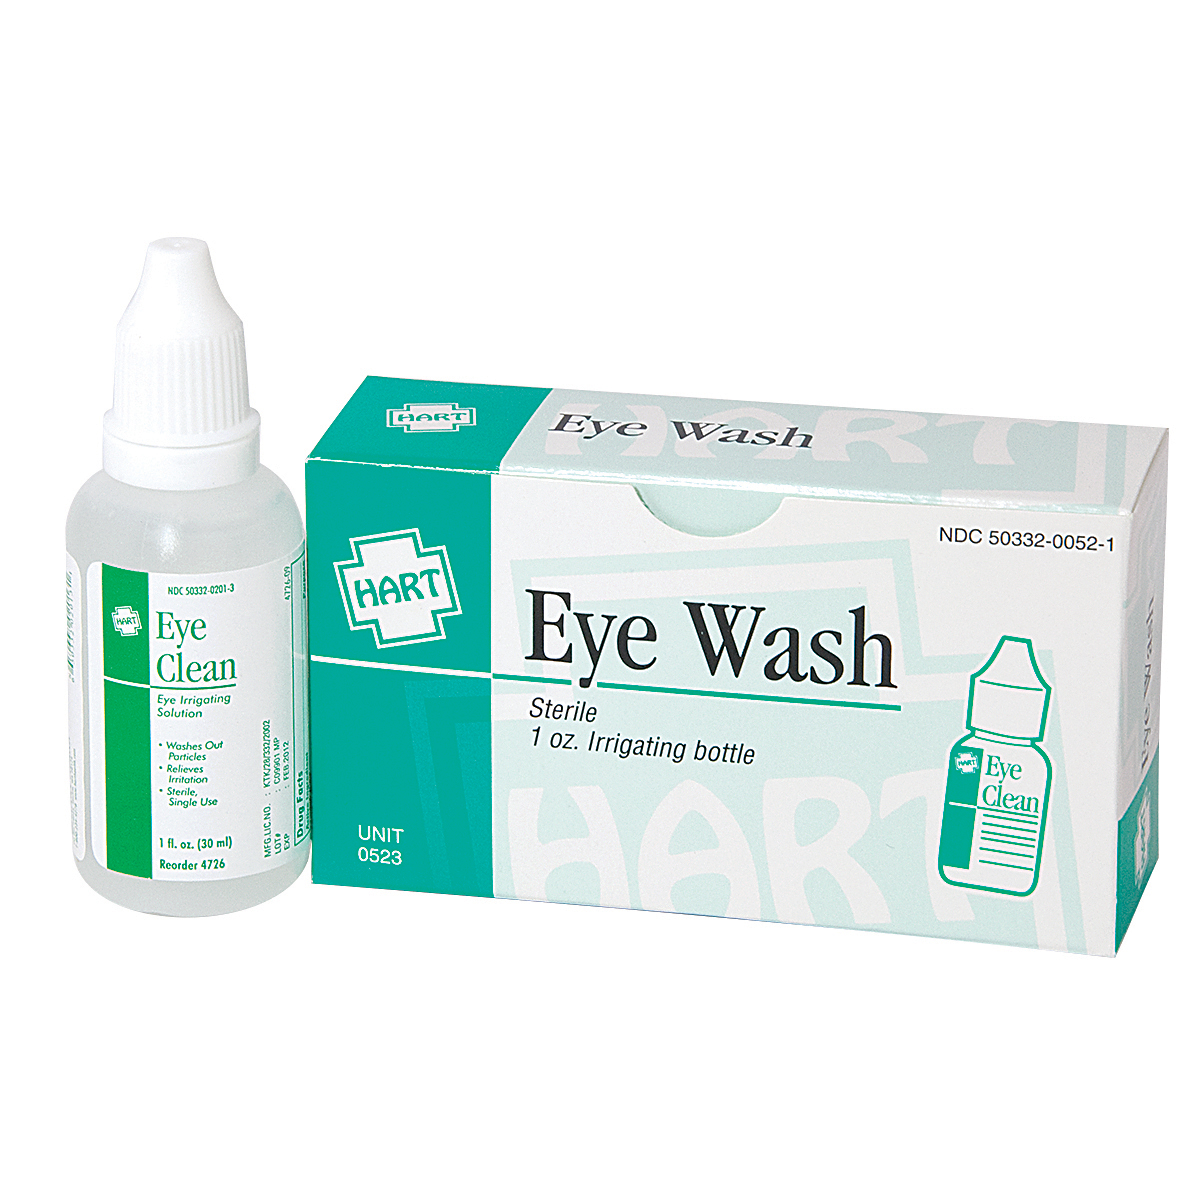 Eye Wash Station, Snap-in holder, with two 16 oz bottles